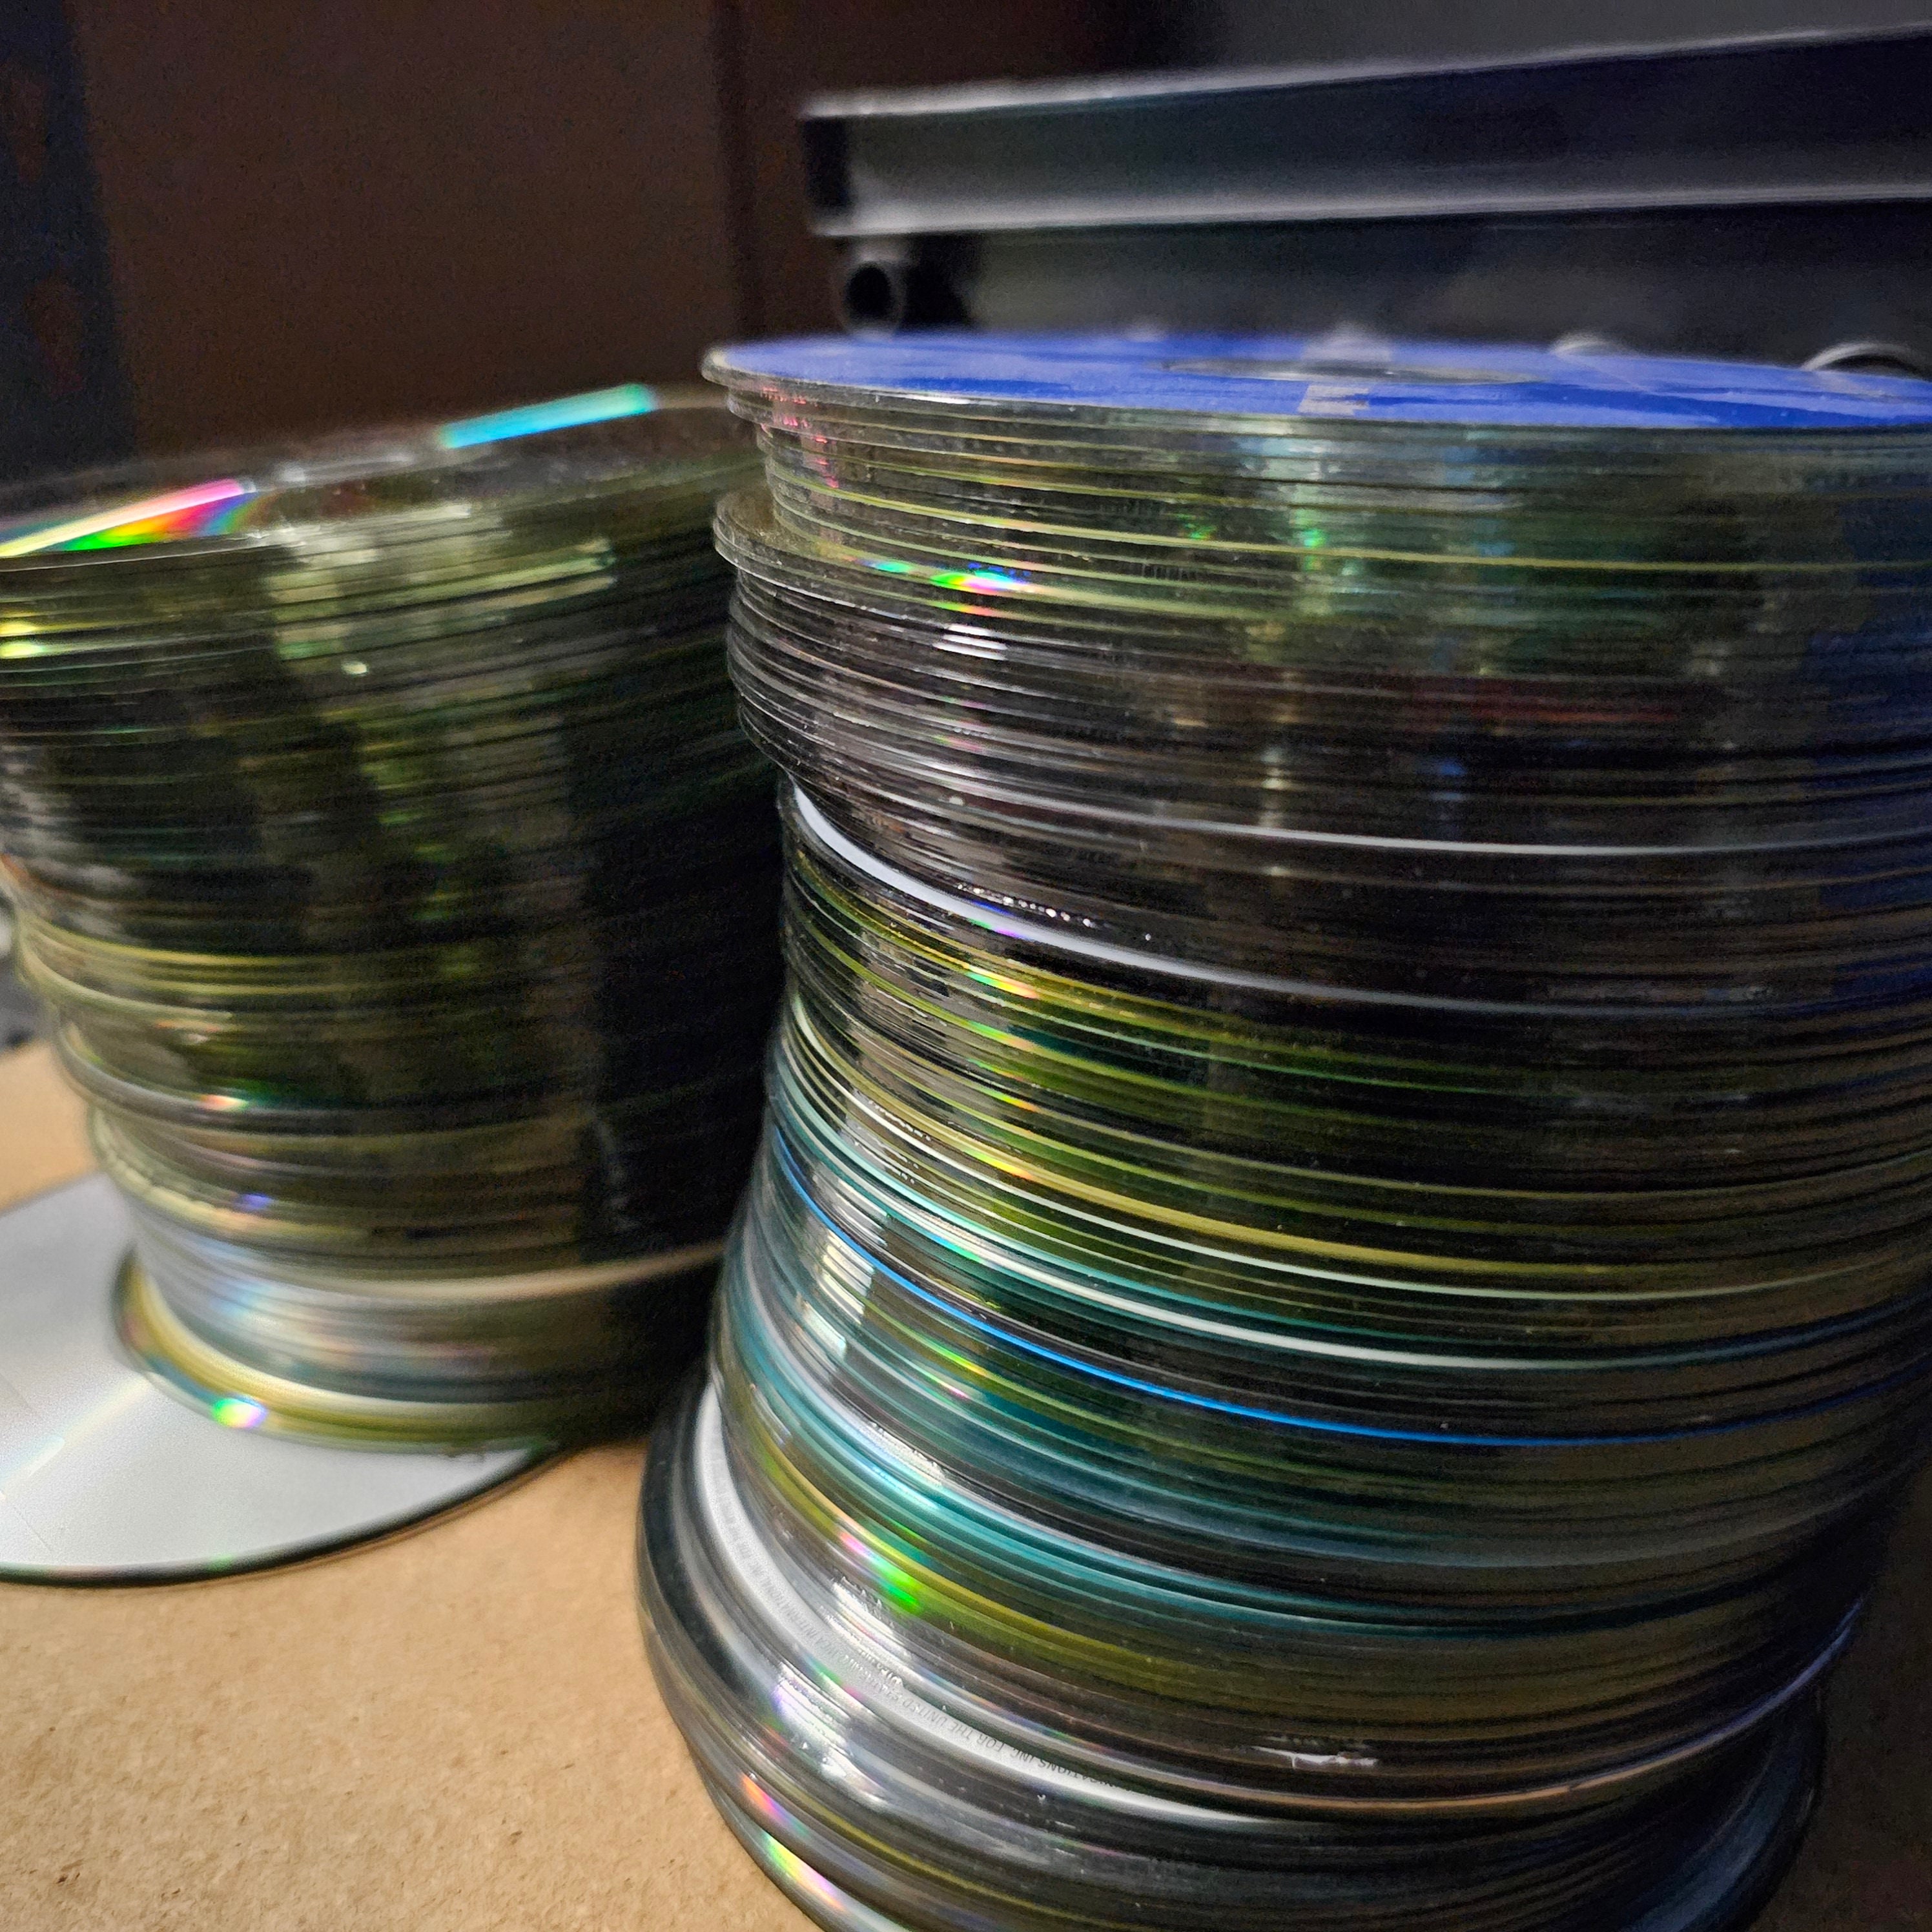 Bundle of Used/ Scratched Cds and Dvds Discs Reflectors for Crafts, Art  Projects Allotment Scarecrow 25, 50, 75 or 100 